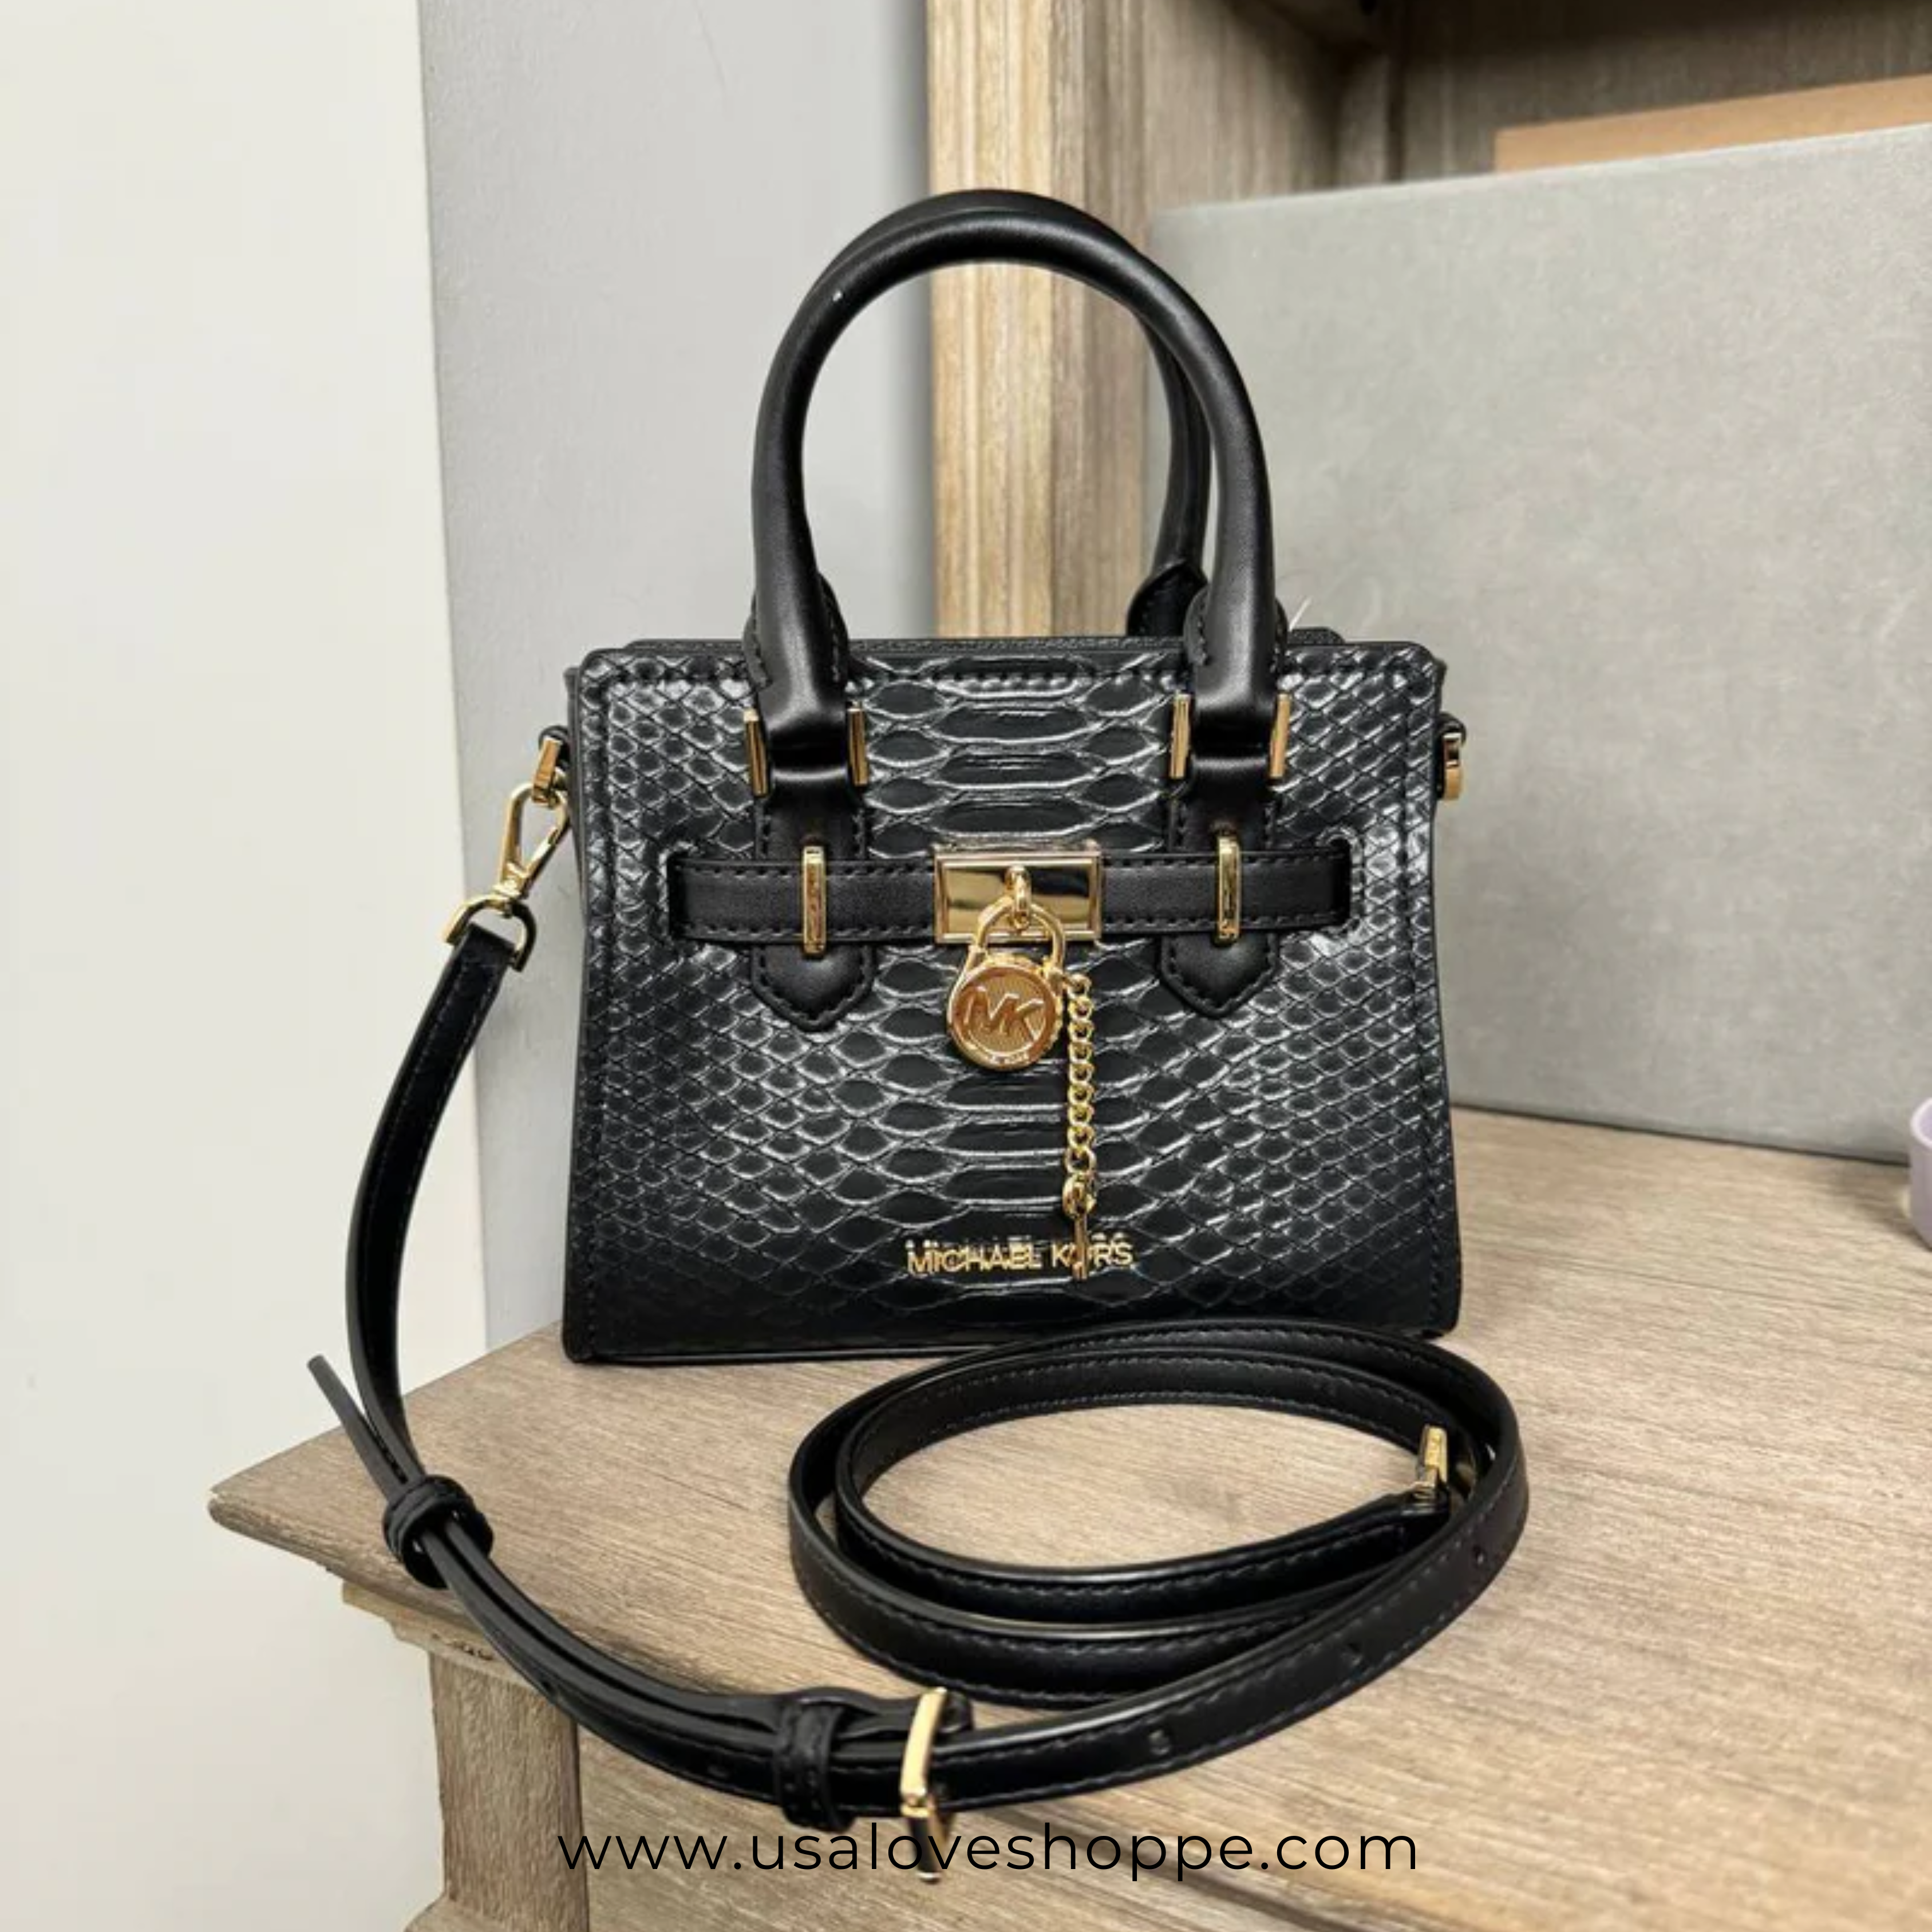 Why Customers Love Michael Kors Handbags: Practical, Stylish, and Perfect for Any Occasion